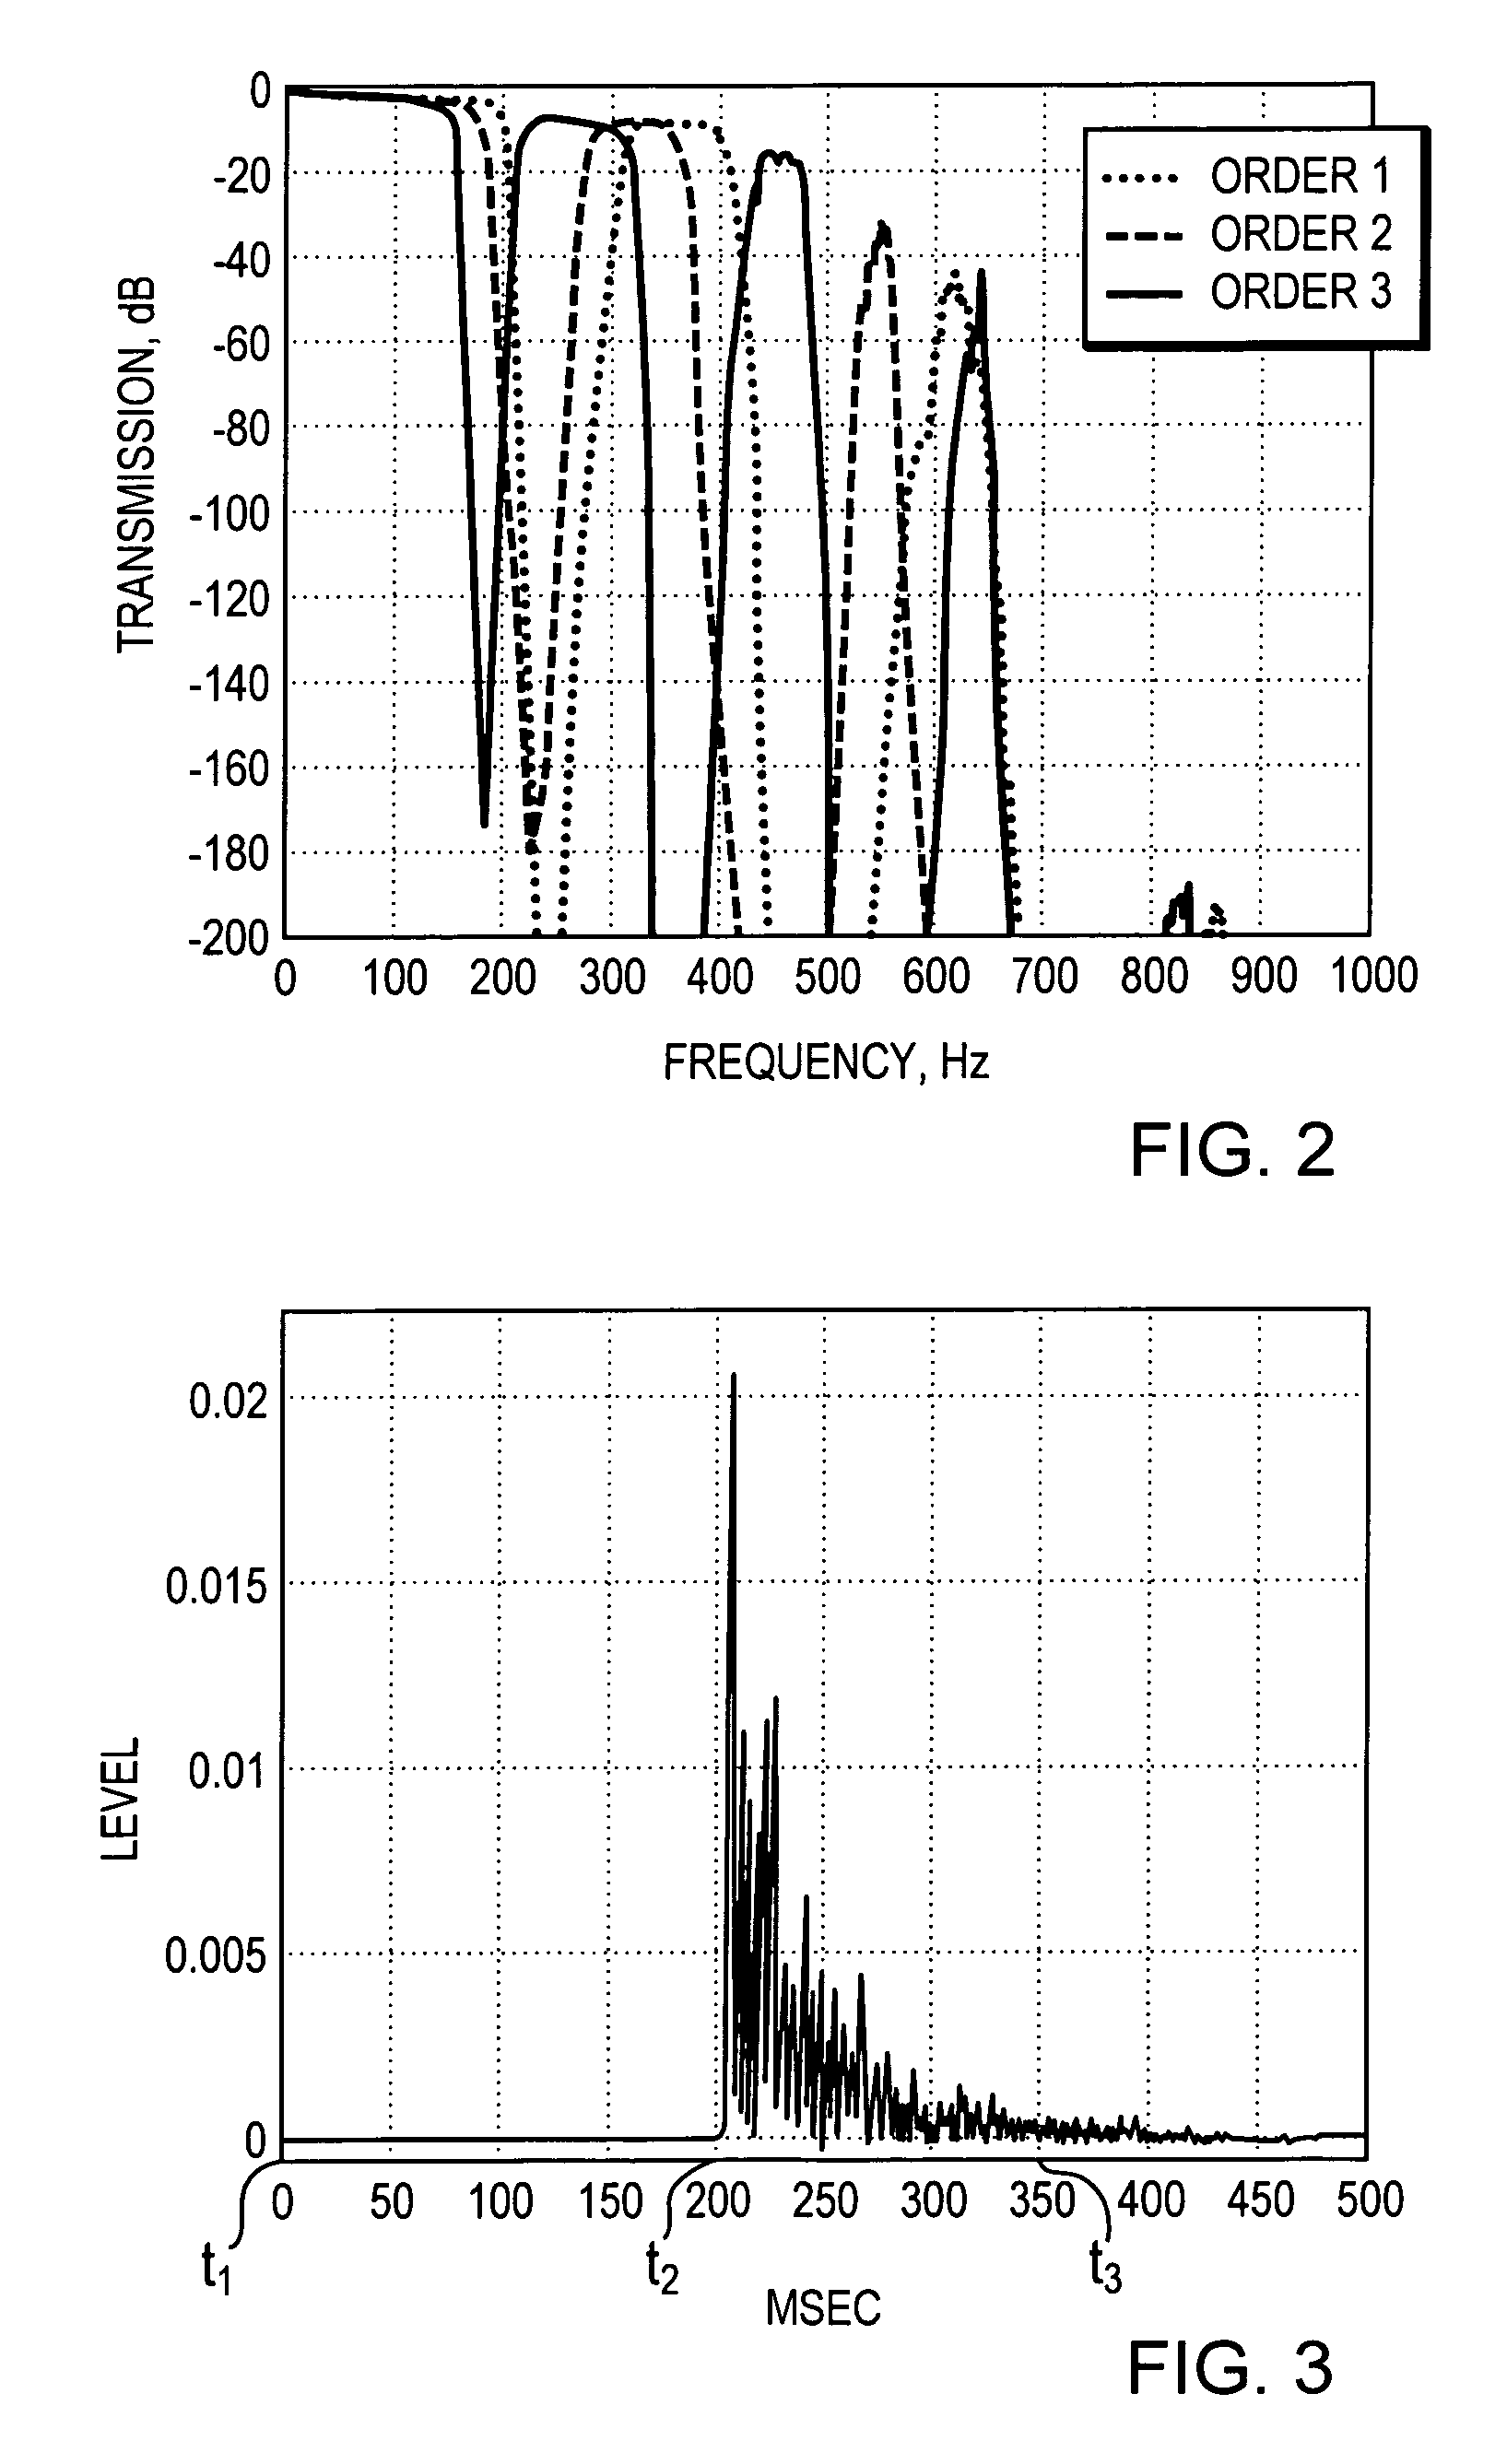 Methods and systems for communicating data through a pipe